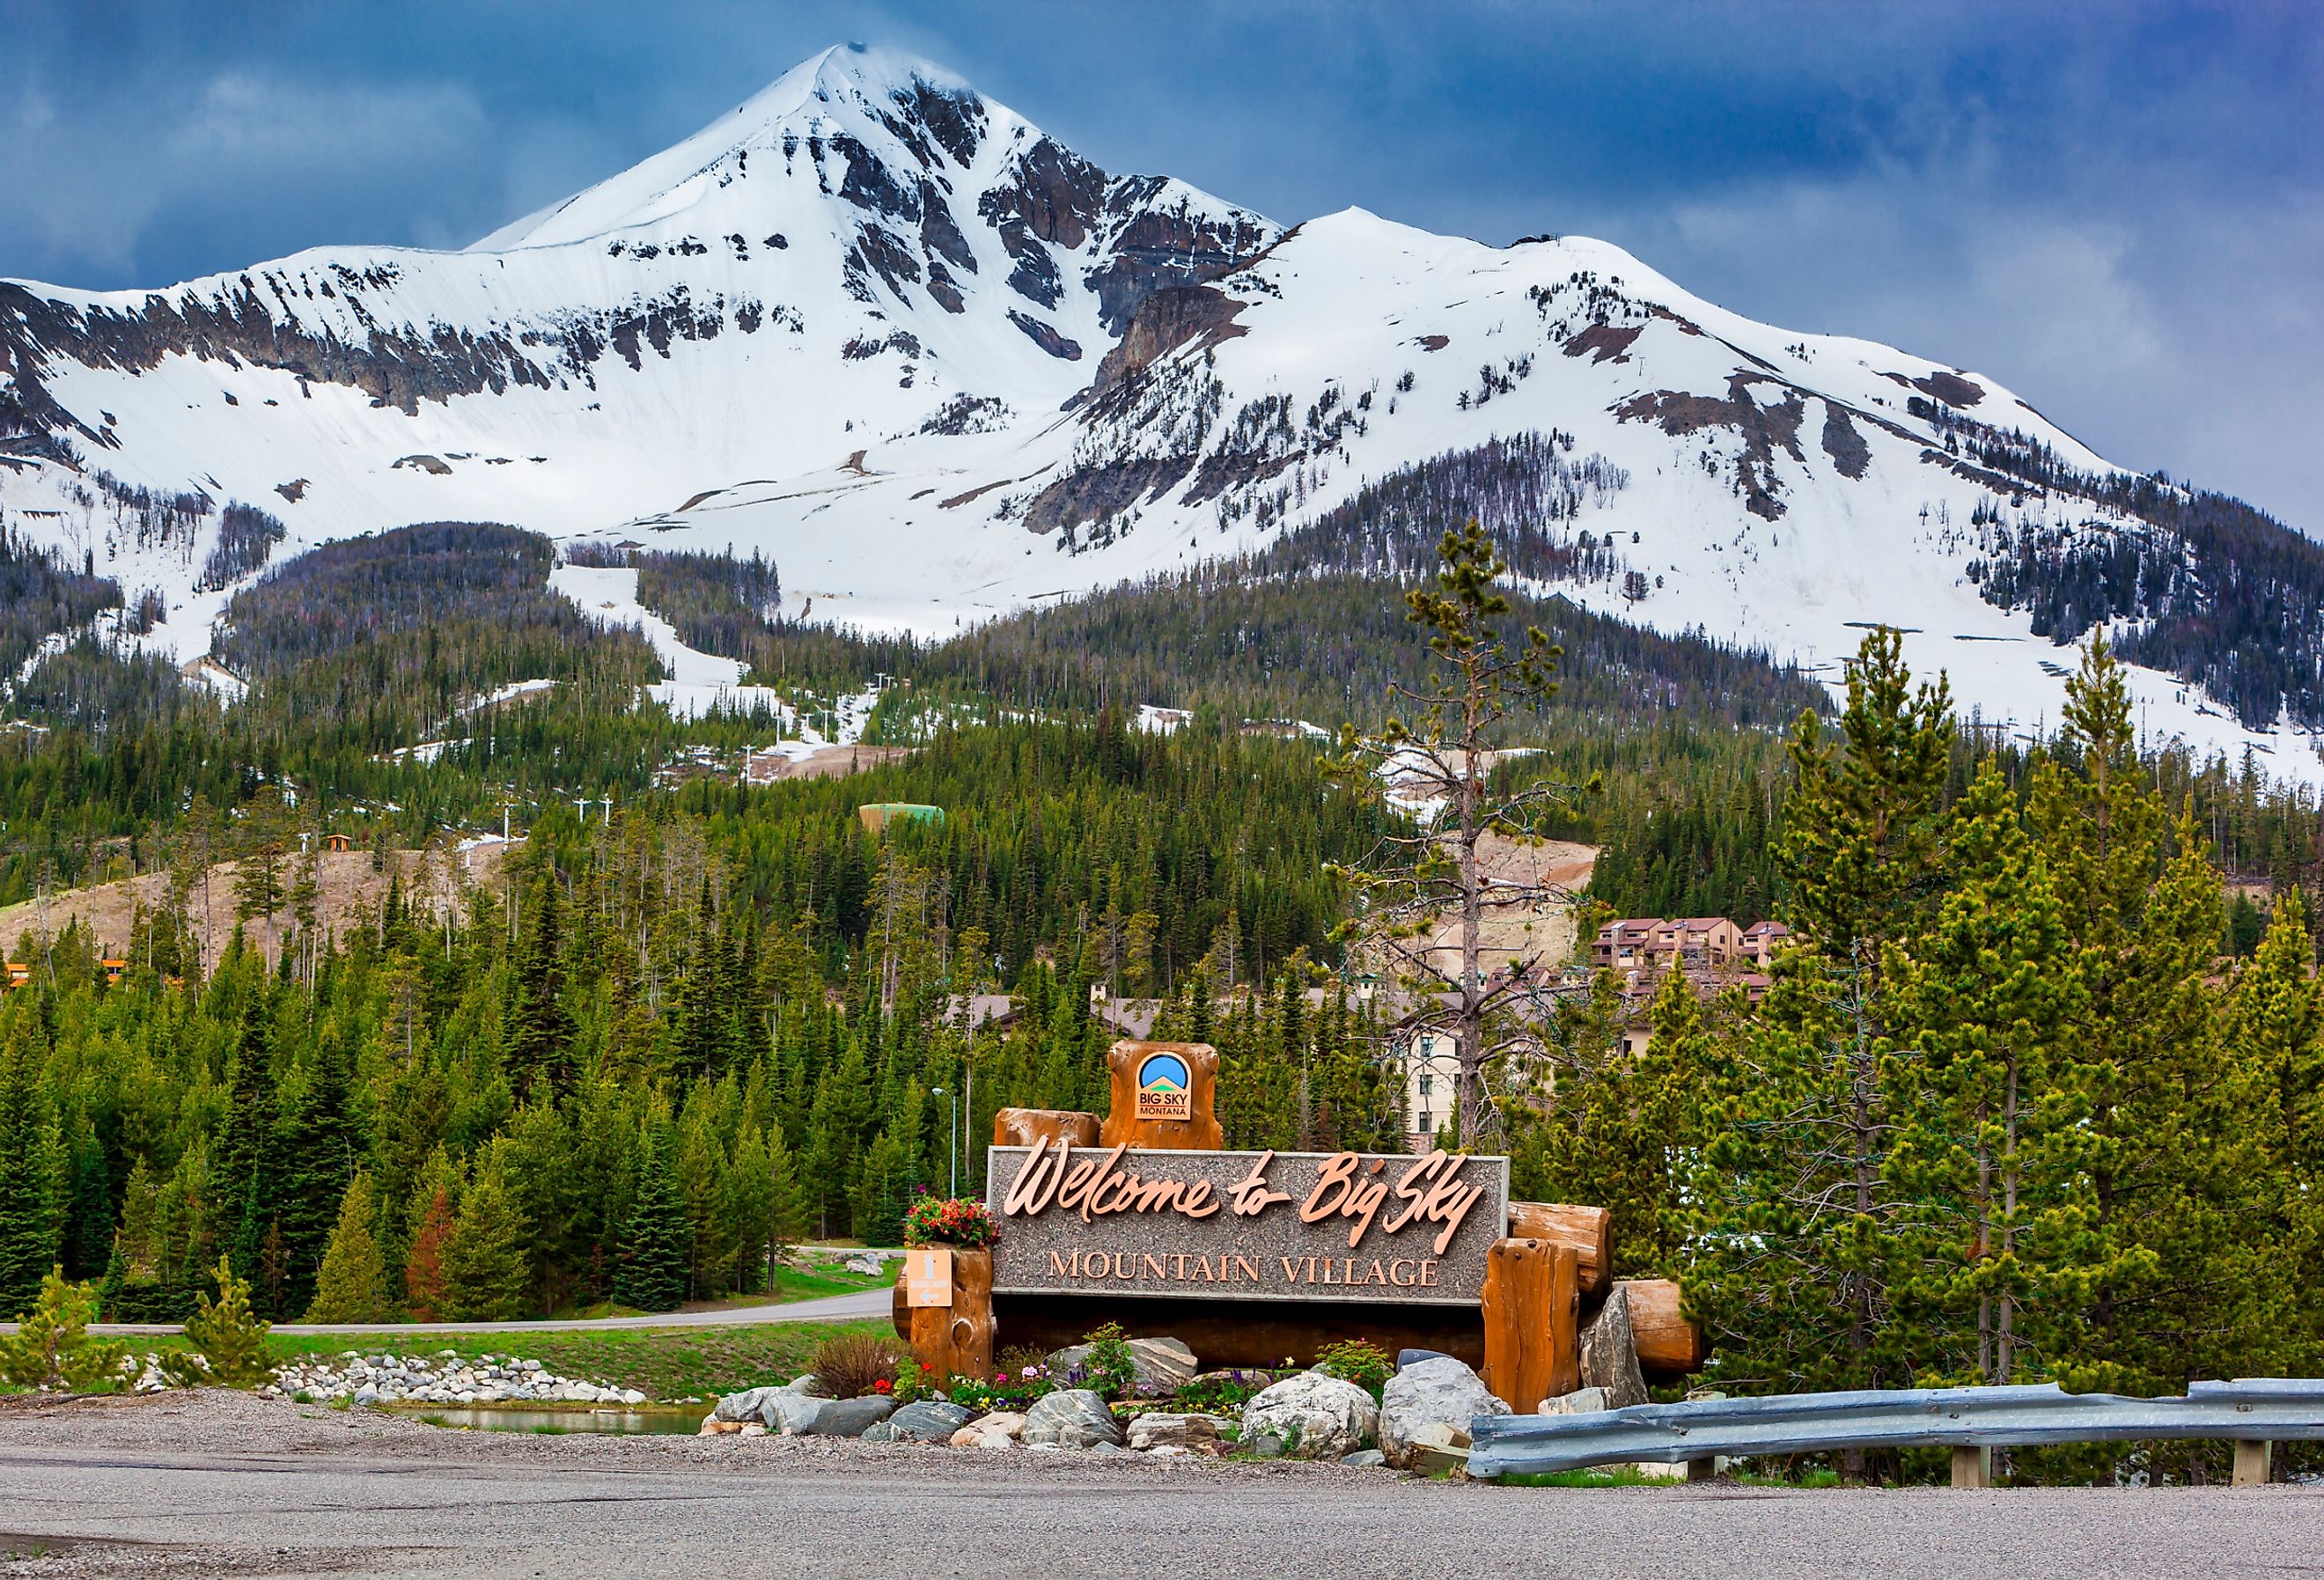 Welcome to Big Sky Mountain Village Signage, Montana. Image credit Zorro Stock Images via Shutterstock